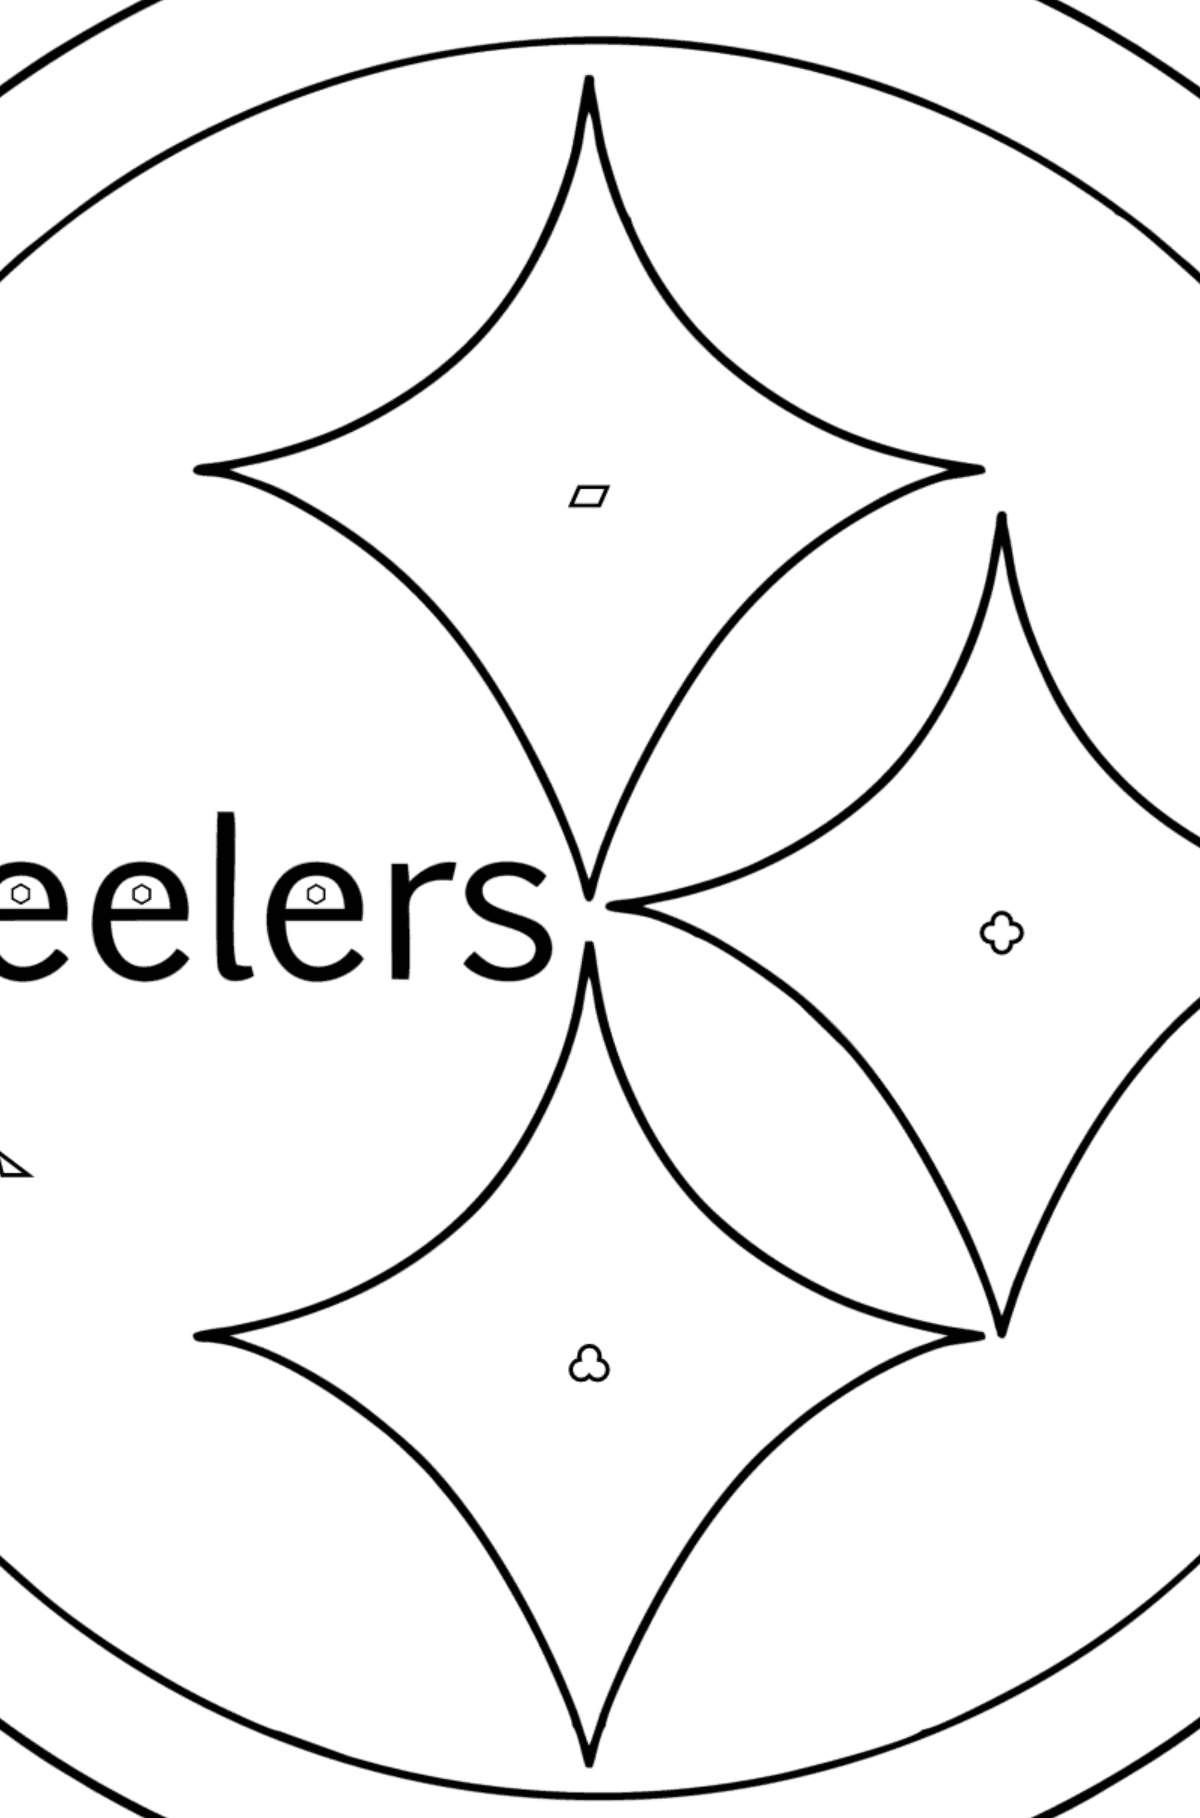 NFL Pittsburgh Steelers сoloring page - Coloring by Geometric Shapes for Kids